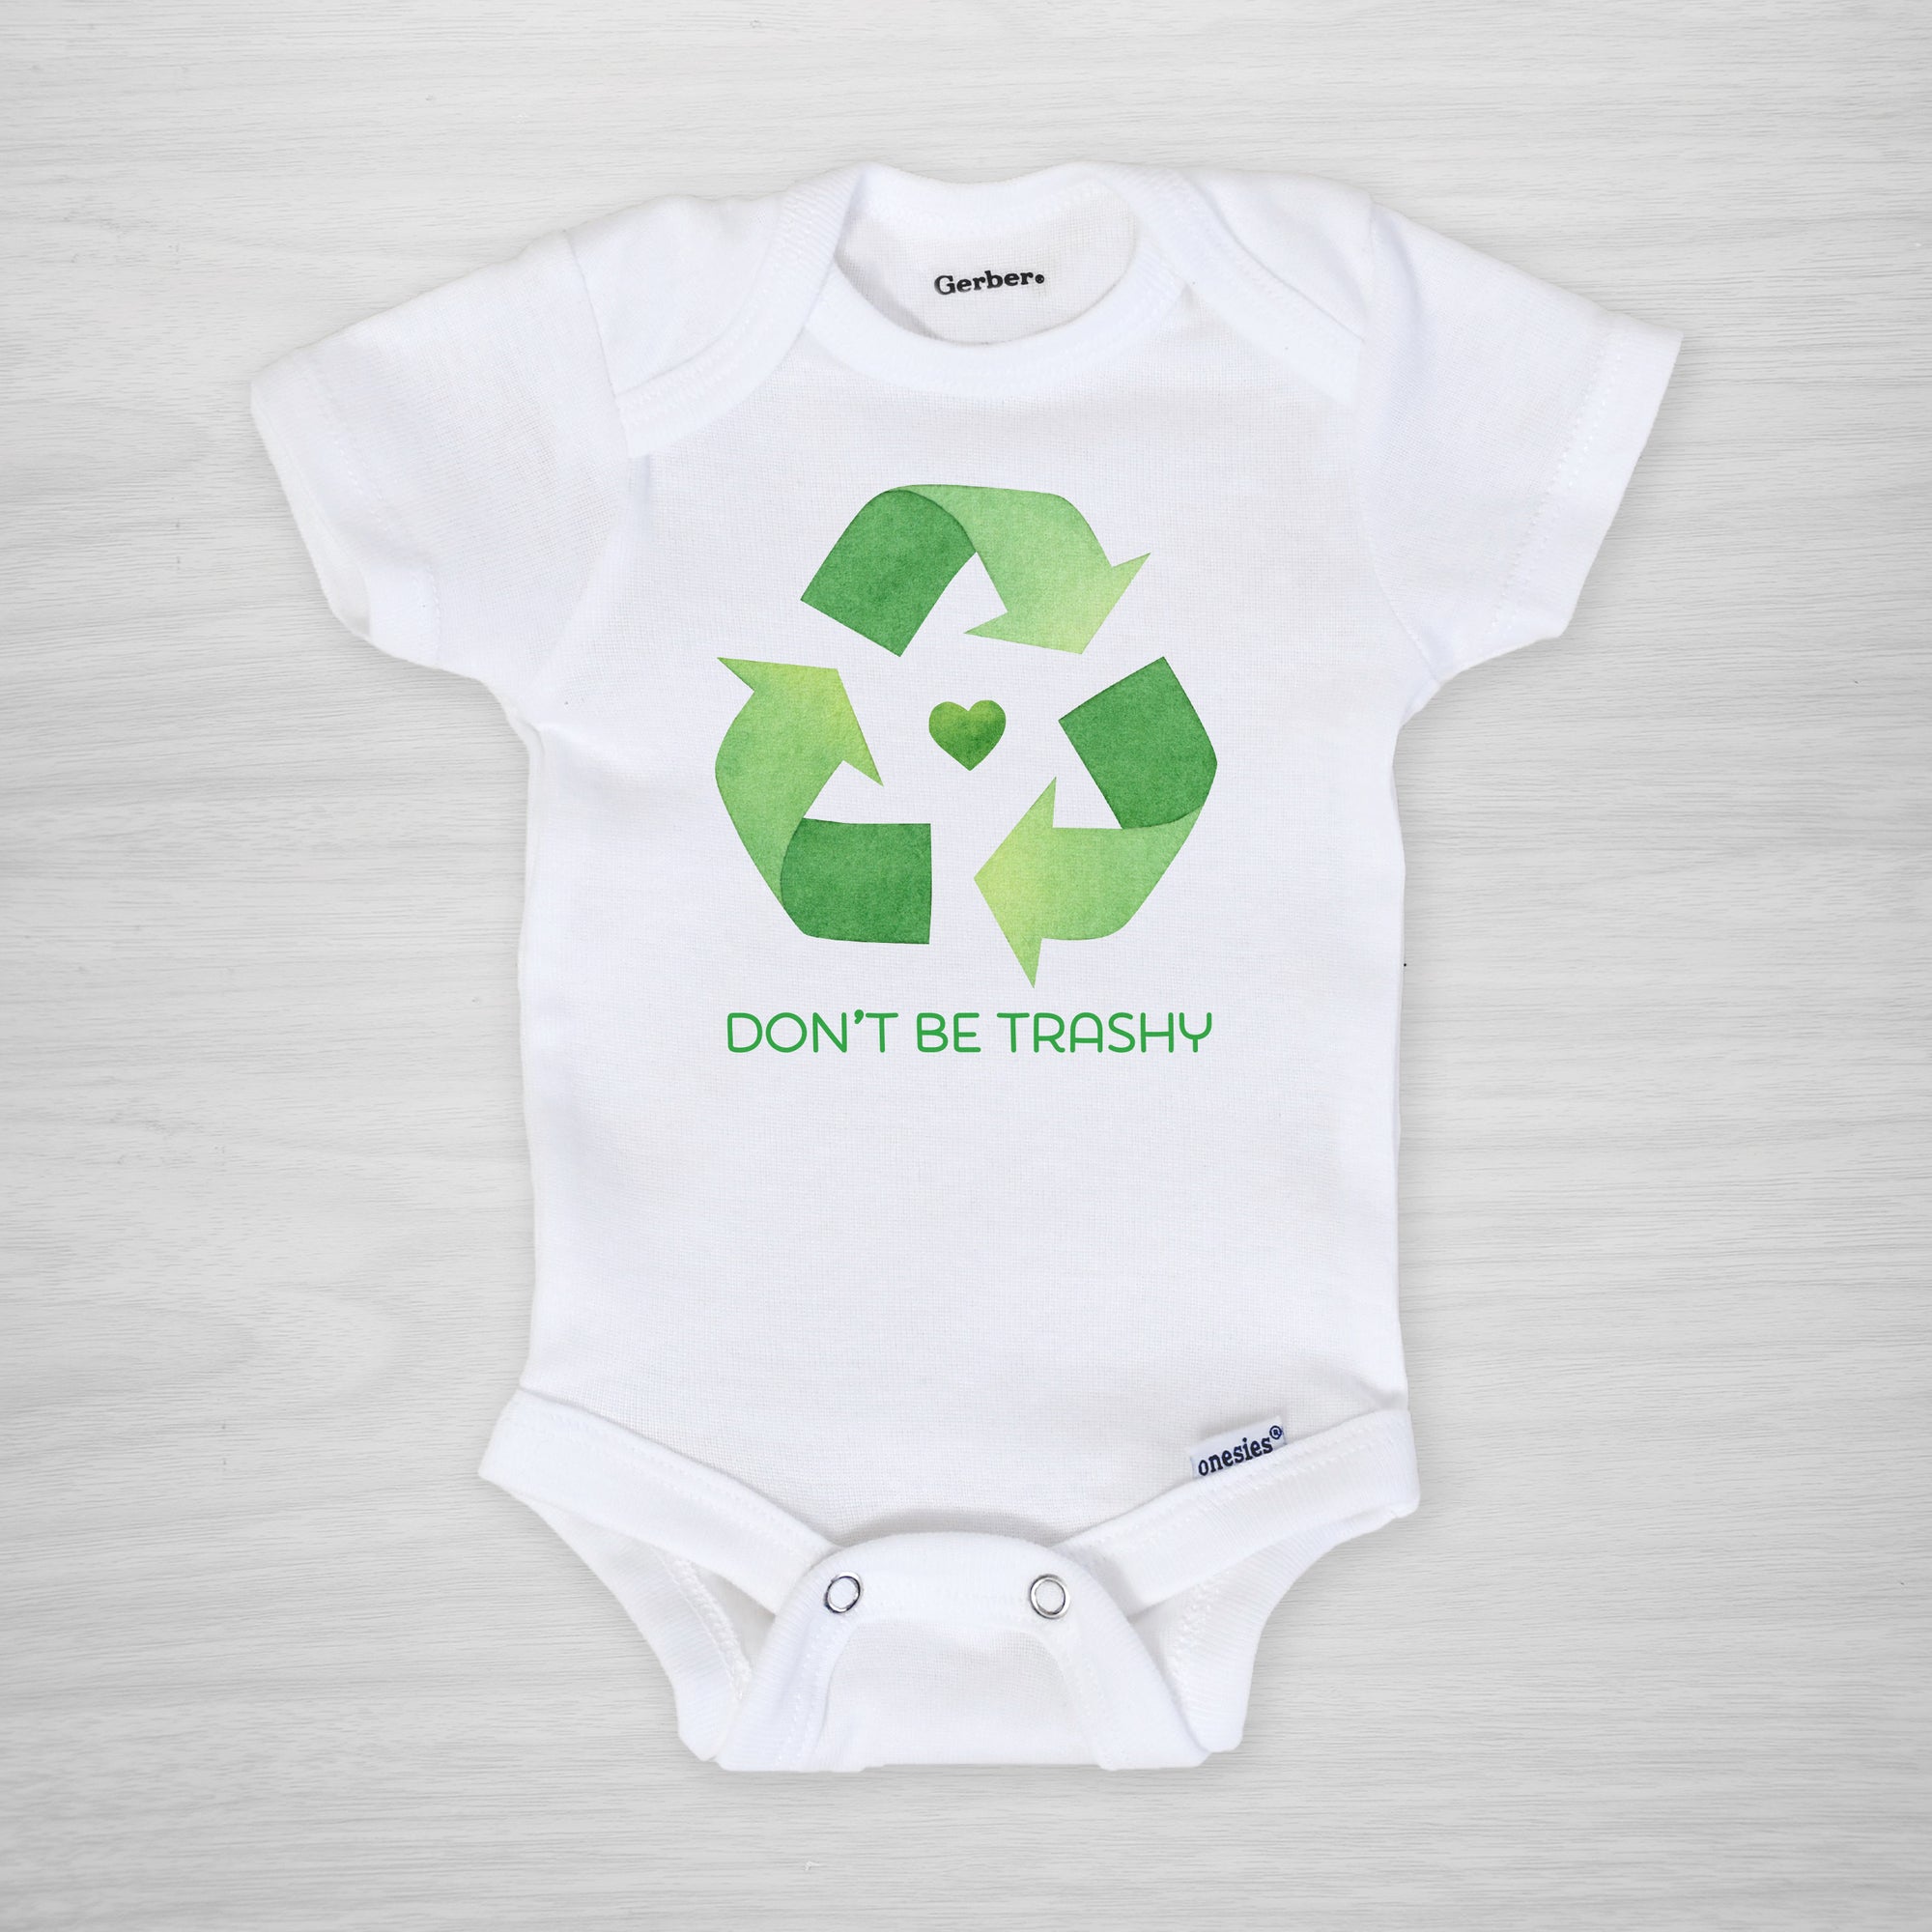 Earth Day Onesie "Don't be Trashy" Recycling Onesie, short sleeved